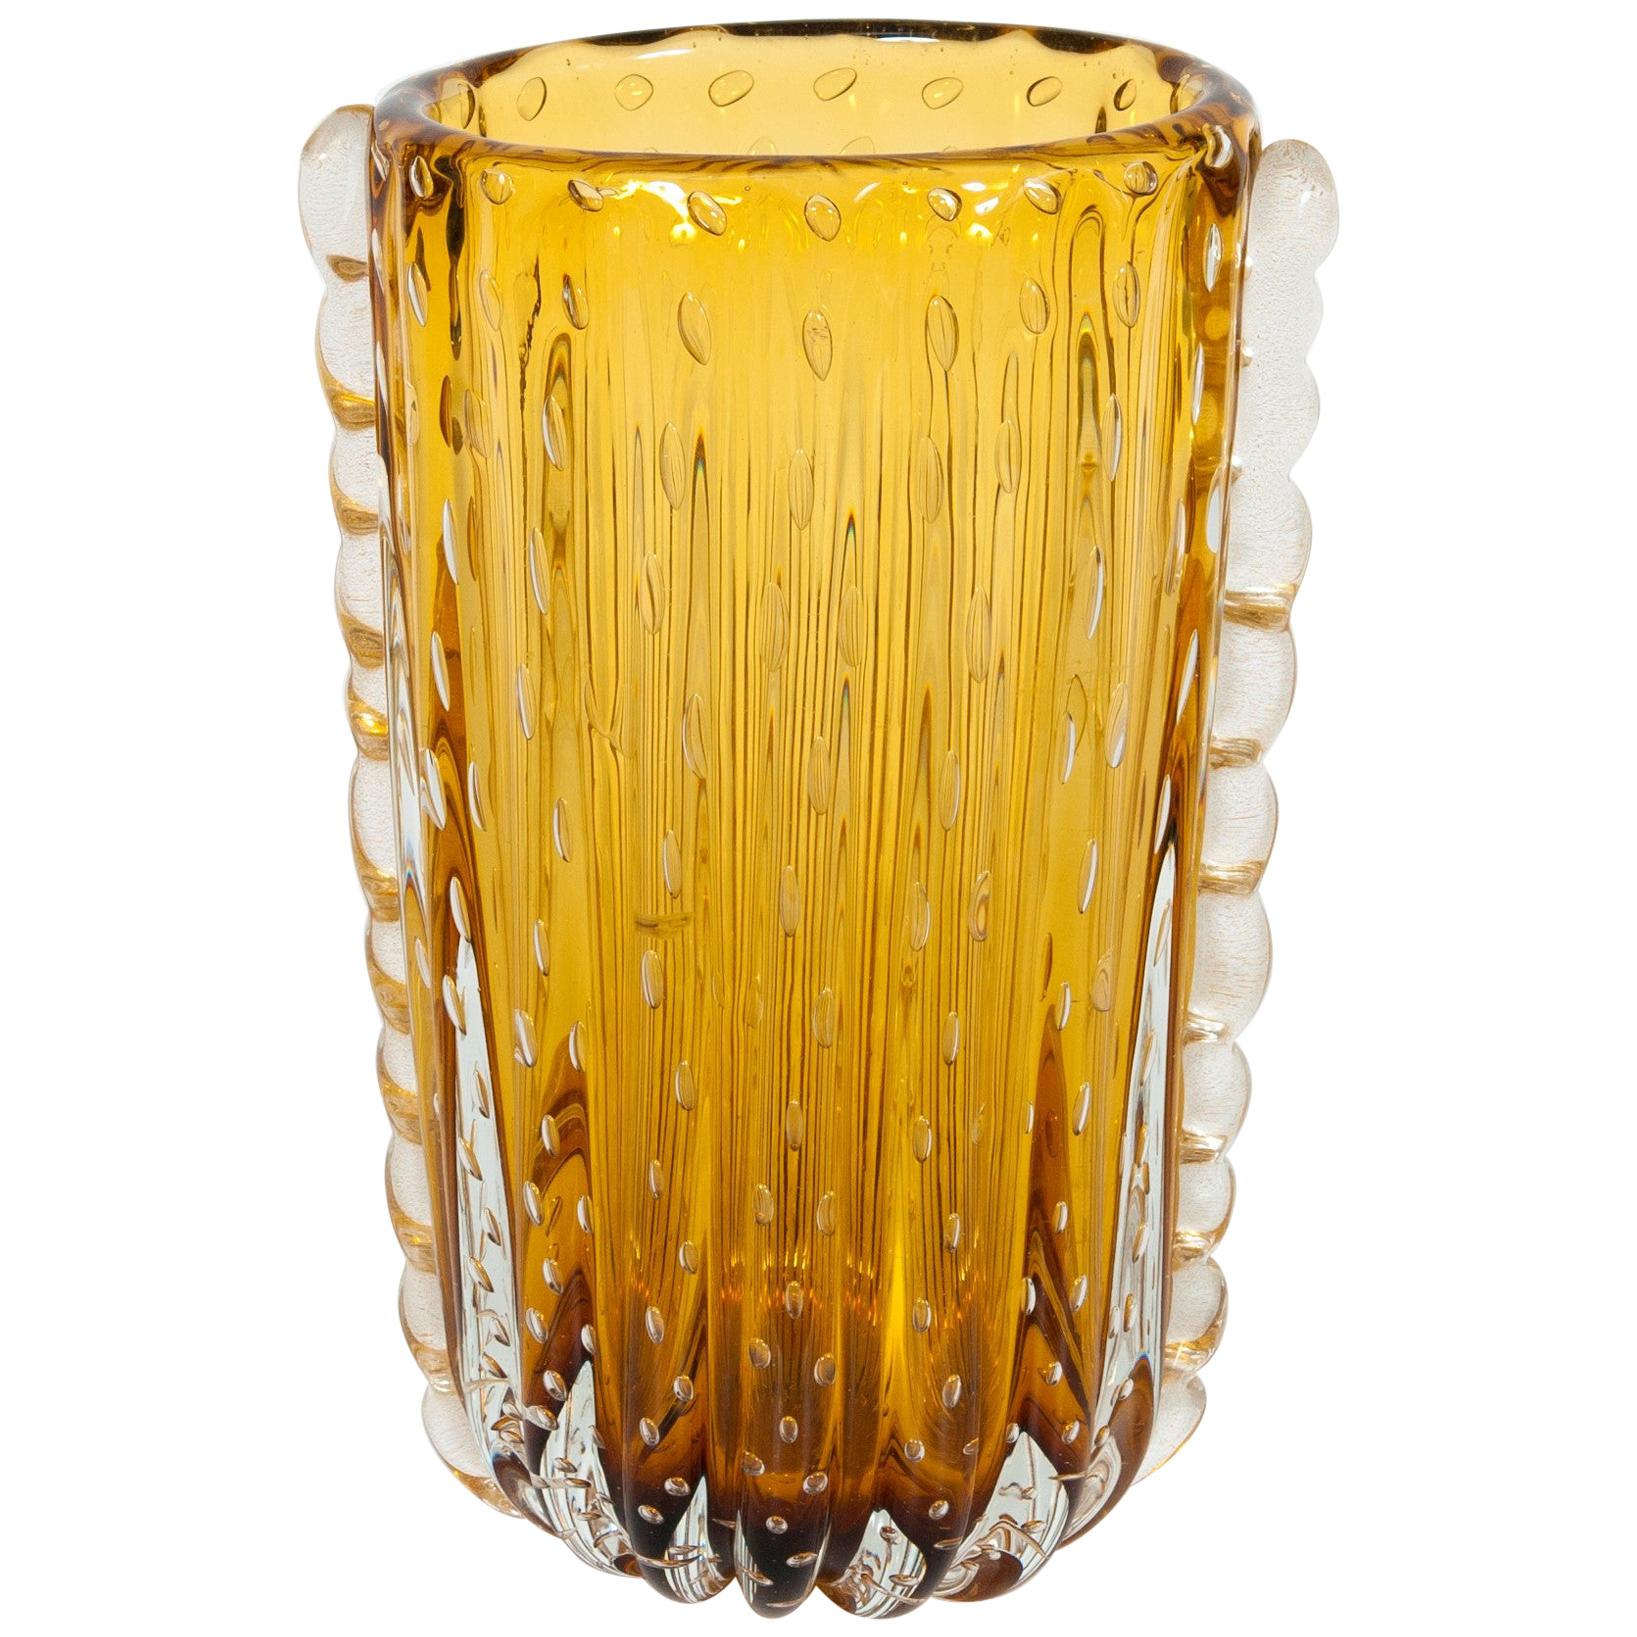 Amber Color Murano Glass Bubble Vase with Morise Attributed to Donà, 1980s Italy